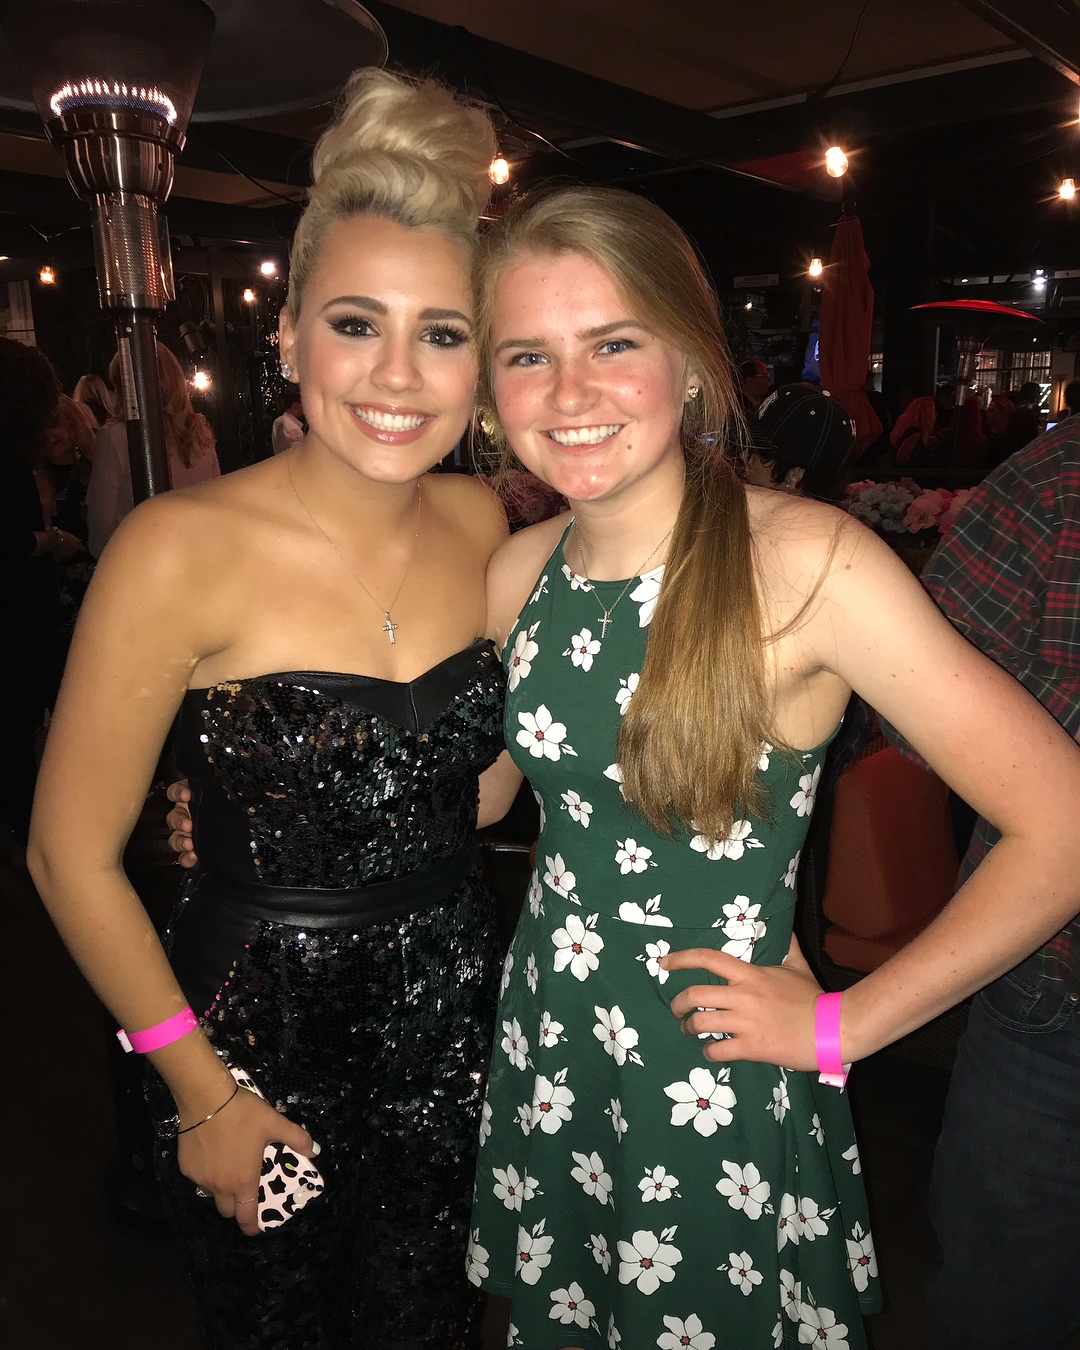 Gabby Barrett and Emma Poppe at the after party at Mixology 101 in Los Angeles, CA on May 21, 2018
Photo credit: Emma Poppe
